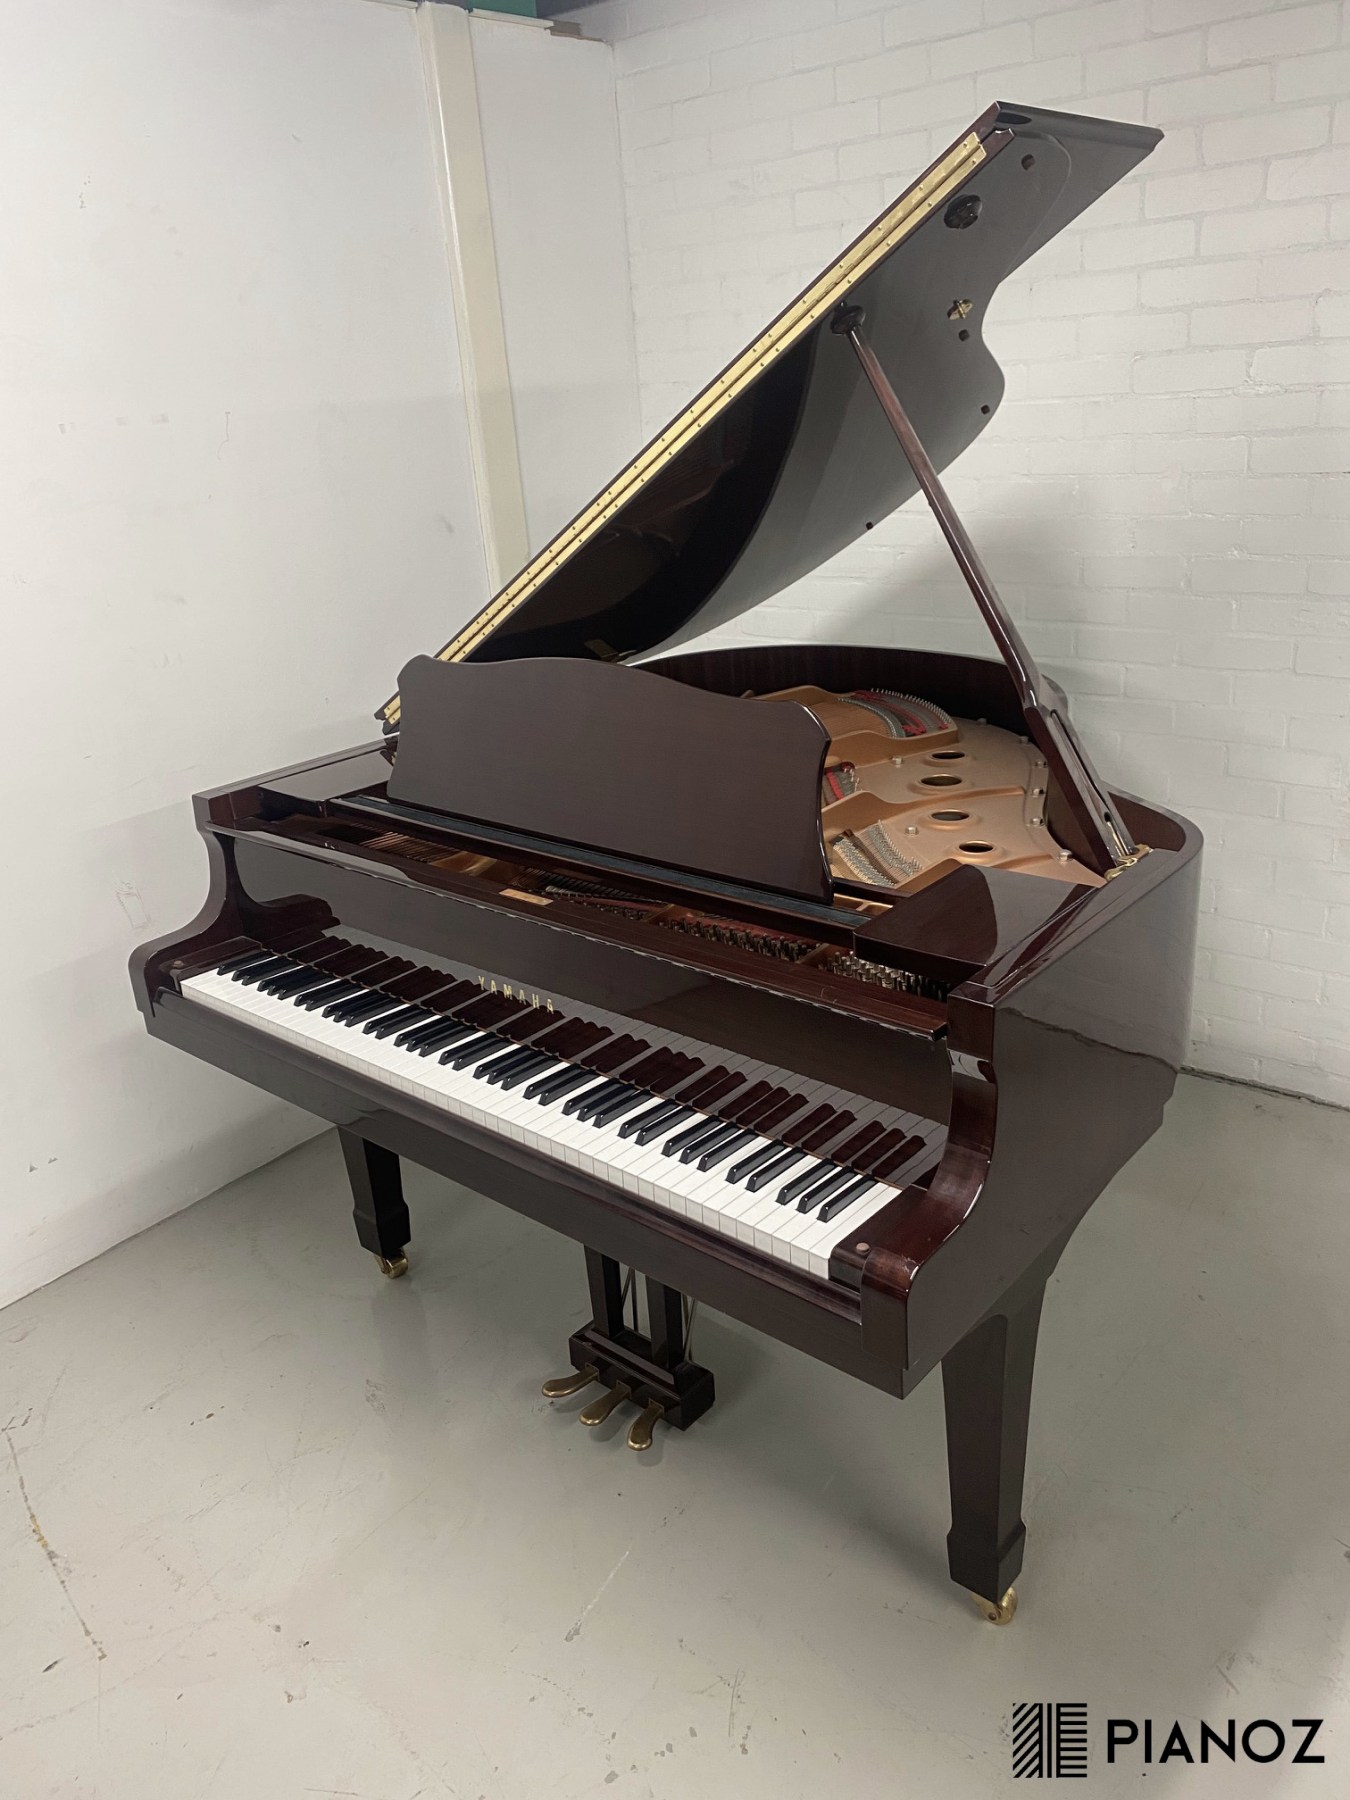 Yamaha C3 Grand Piano piano for sale in UK